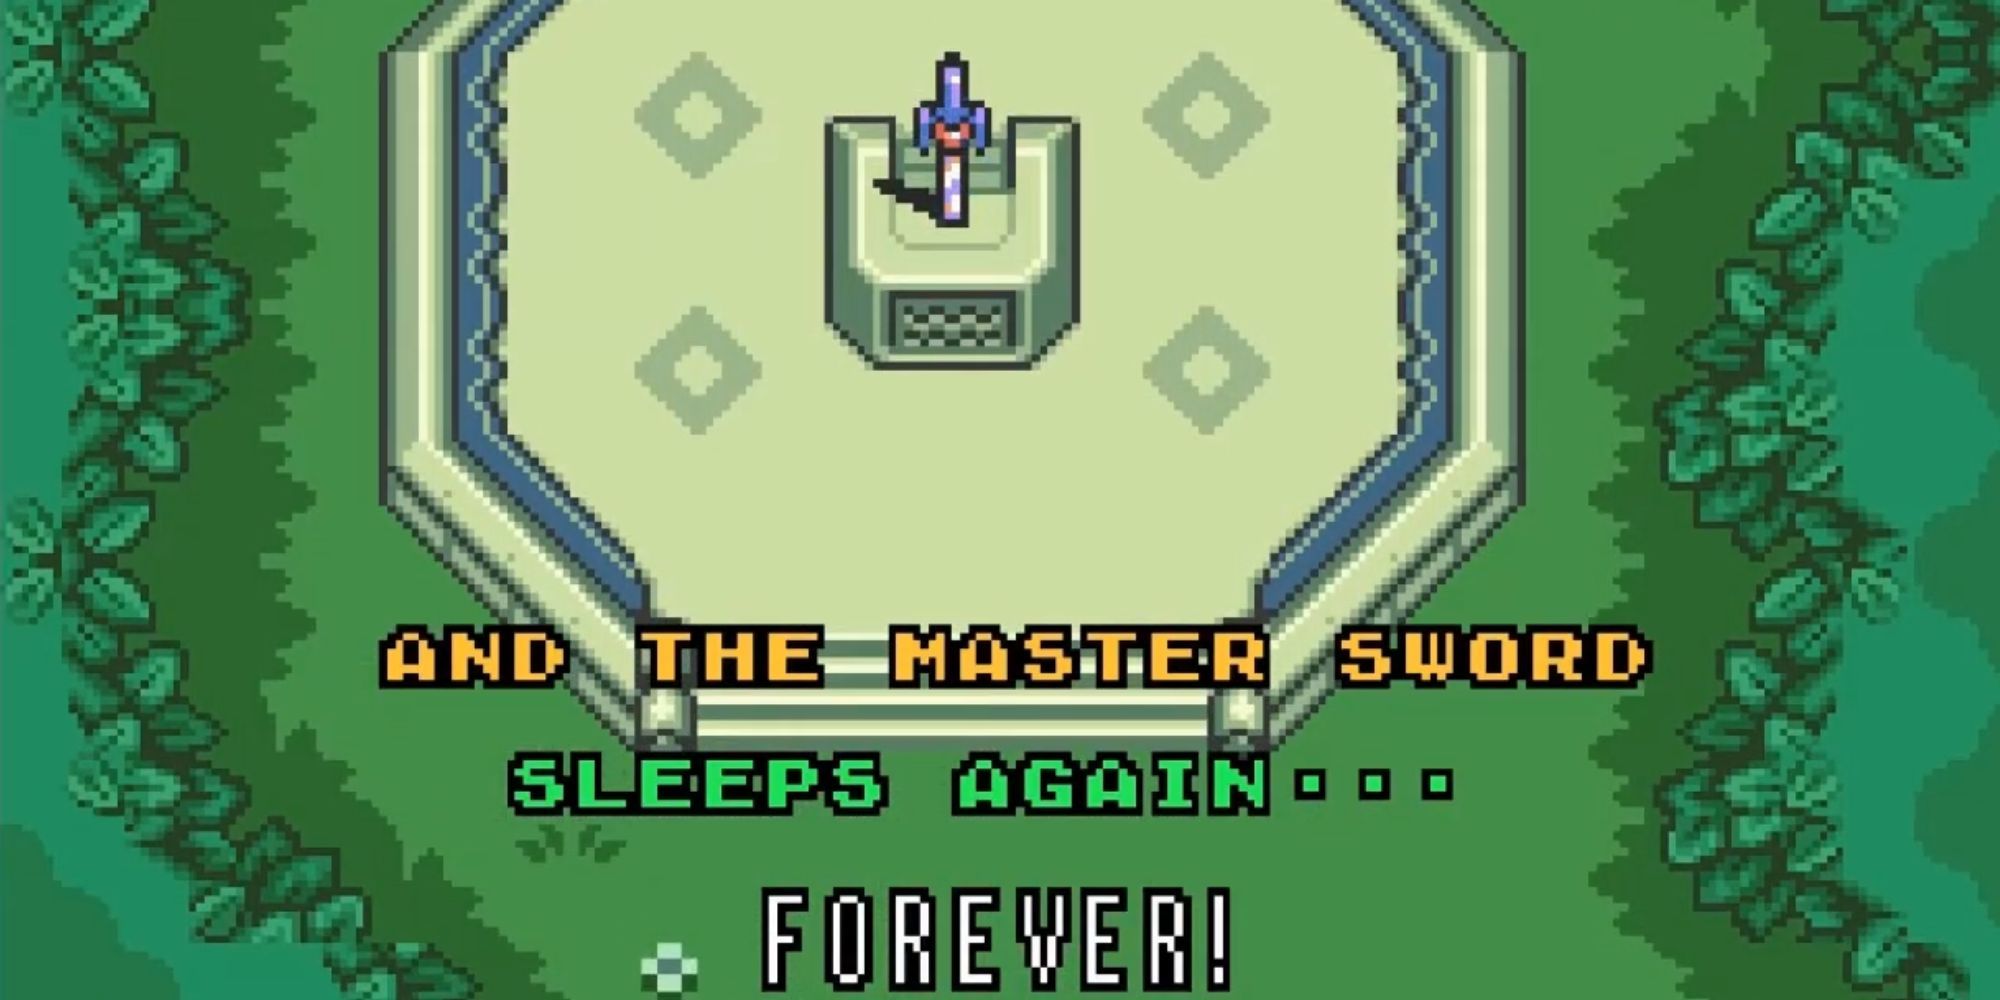 The Master Sword is put to rest.